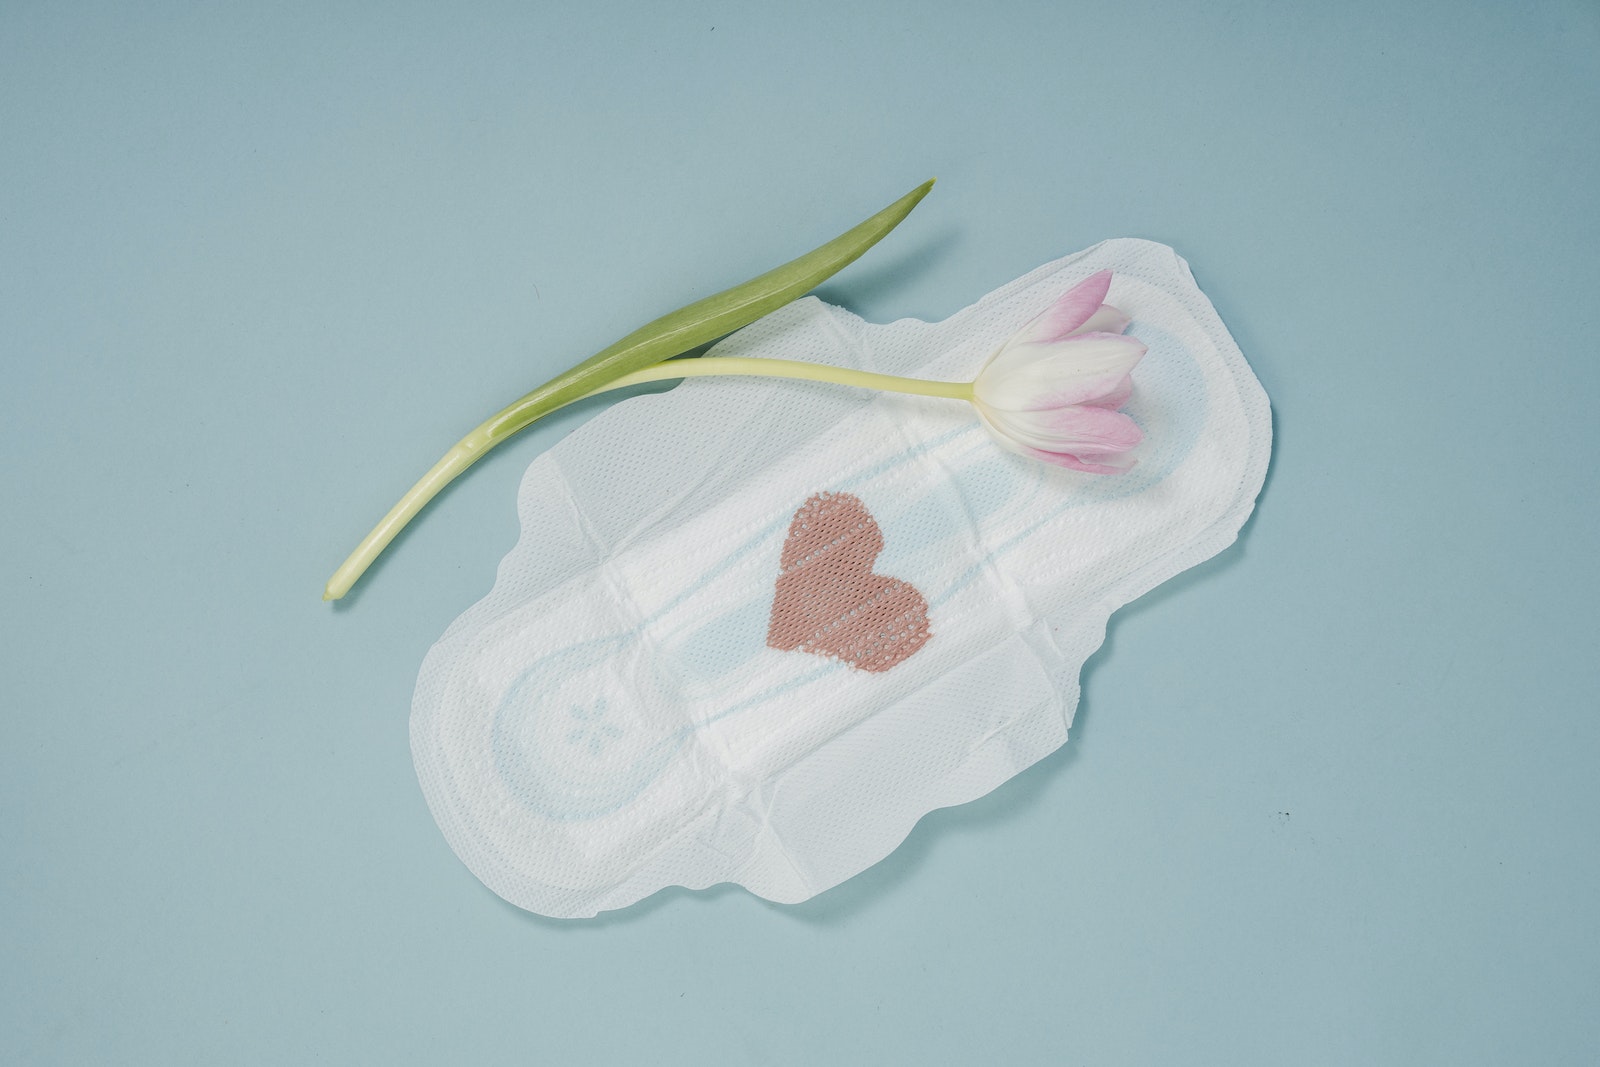 Feminine hygiene pad and pink tulip placed on blue background